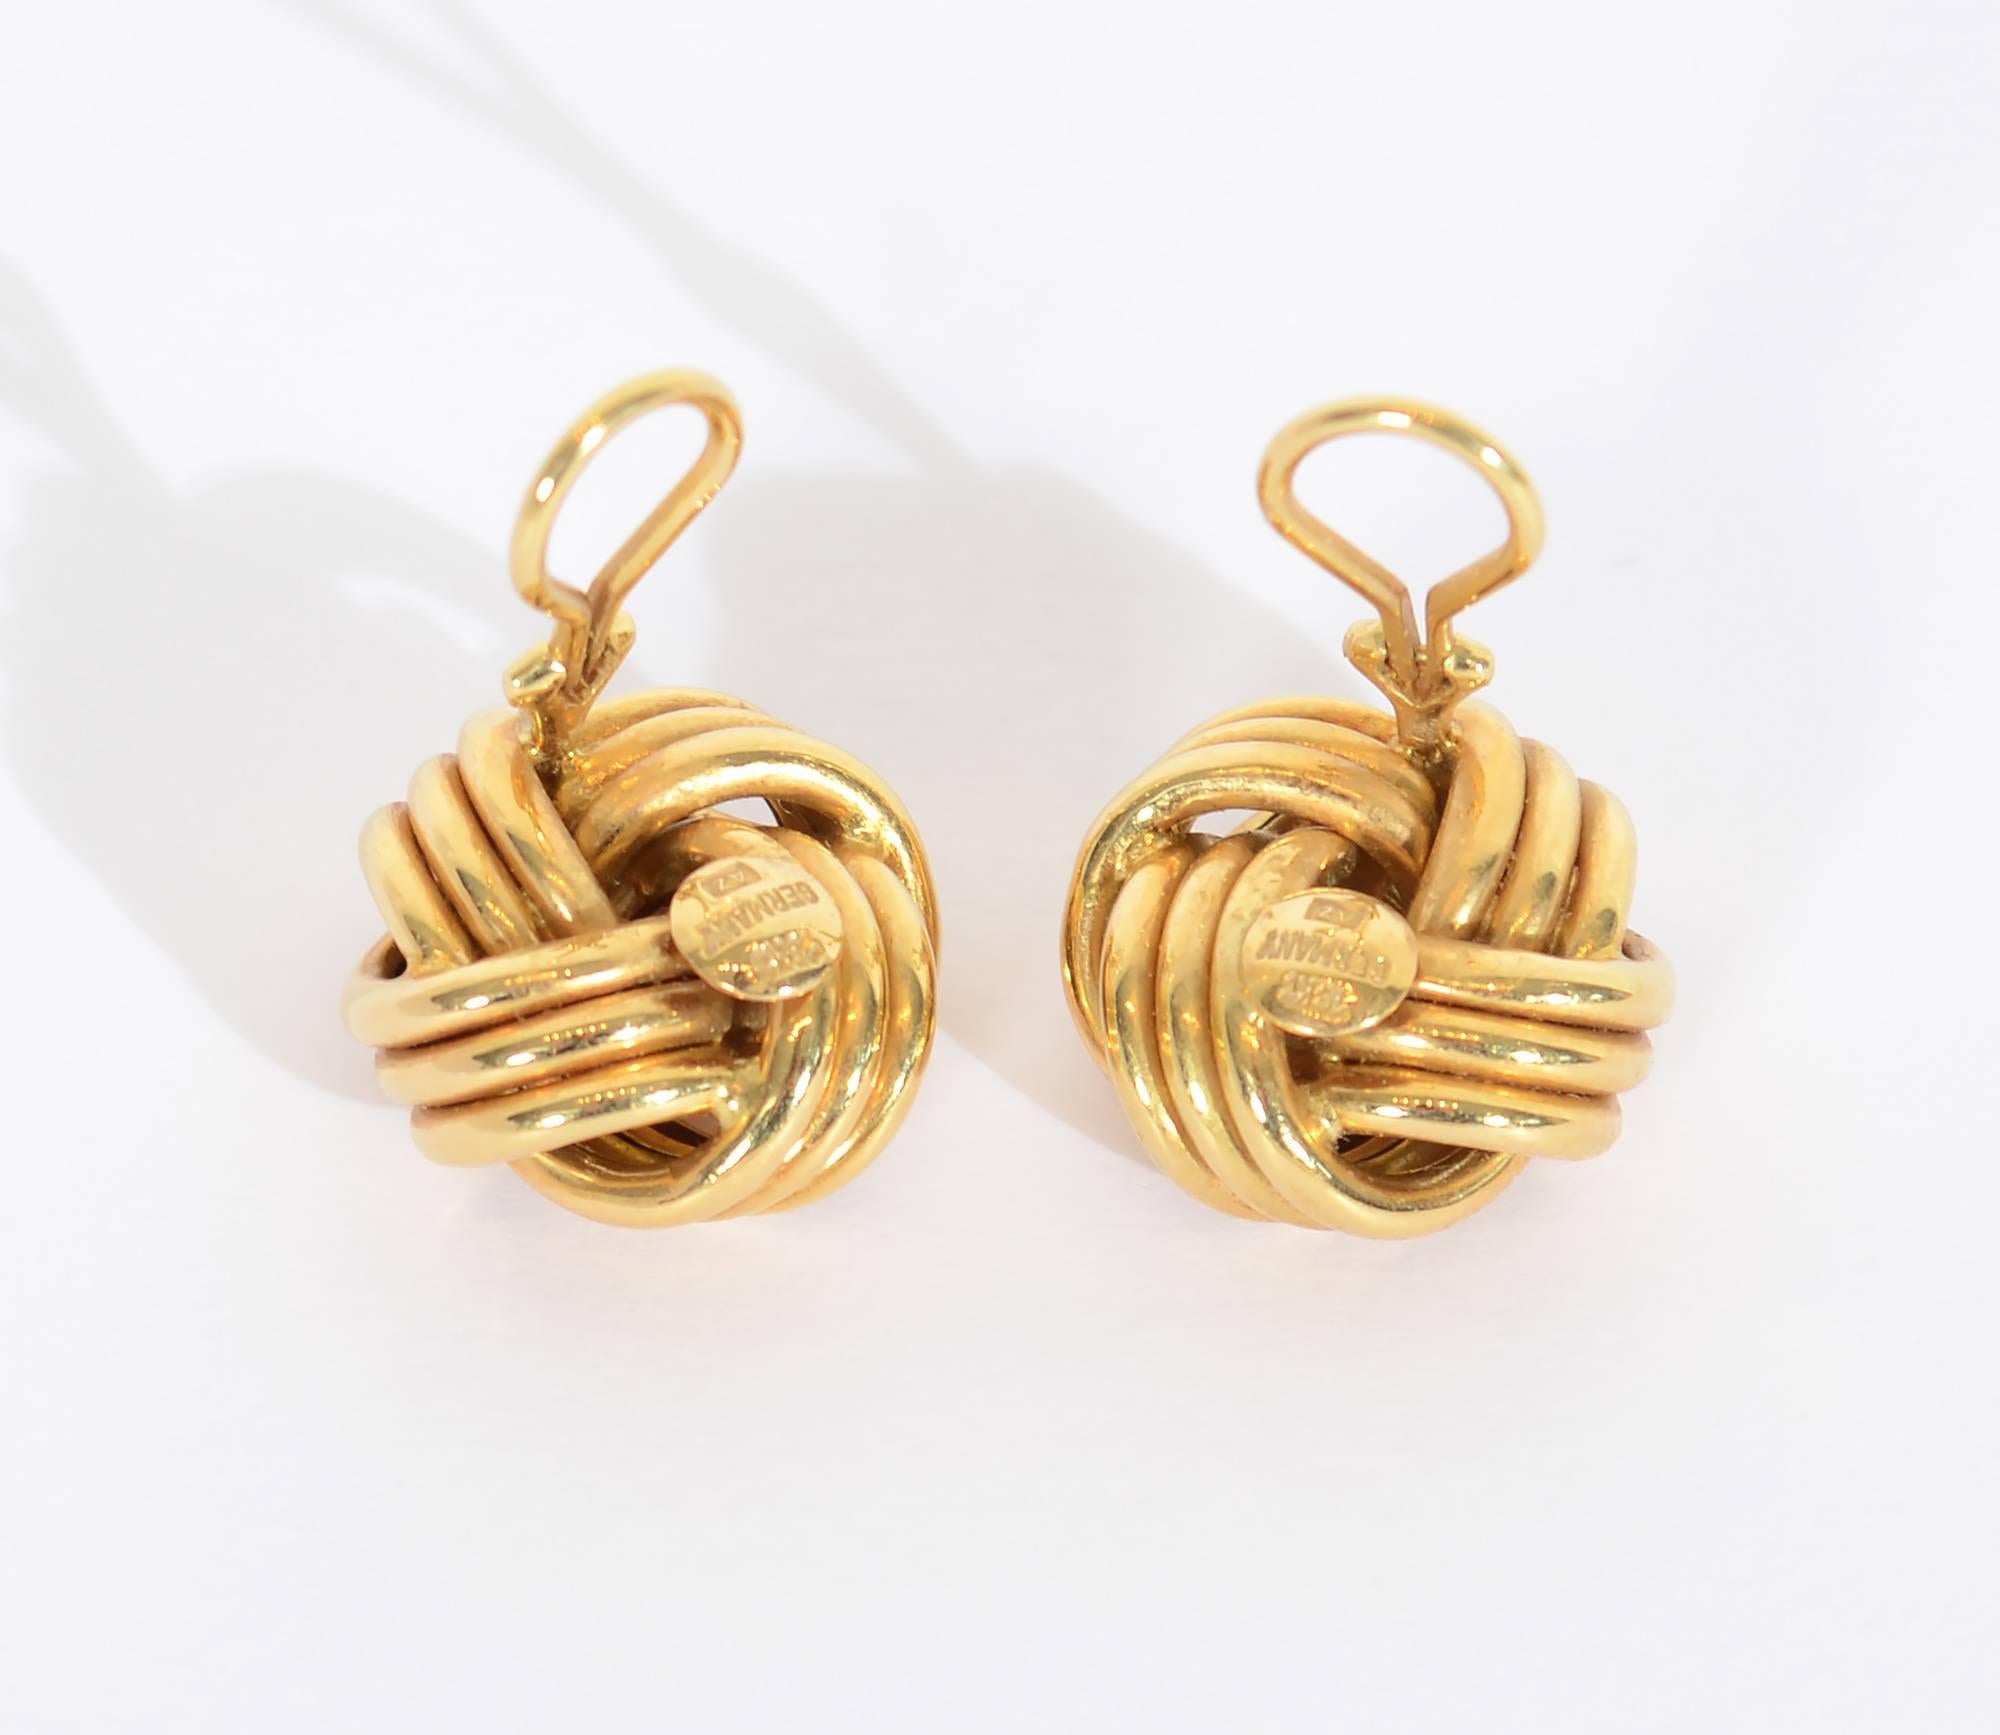 These classic knot earrings are nicely made with  triple strands. They measure 7/8